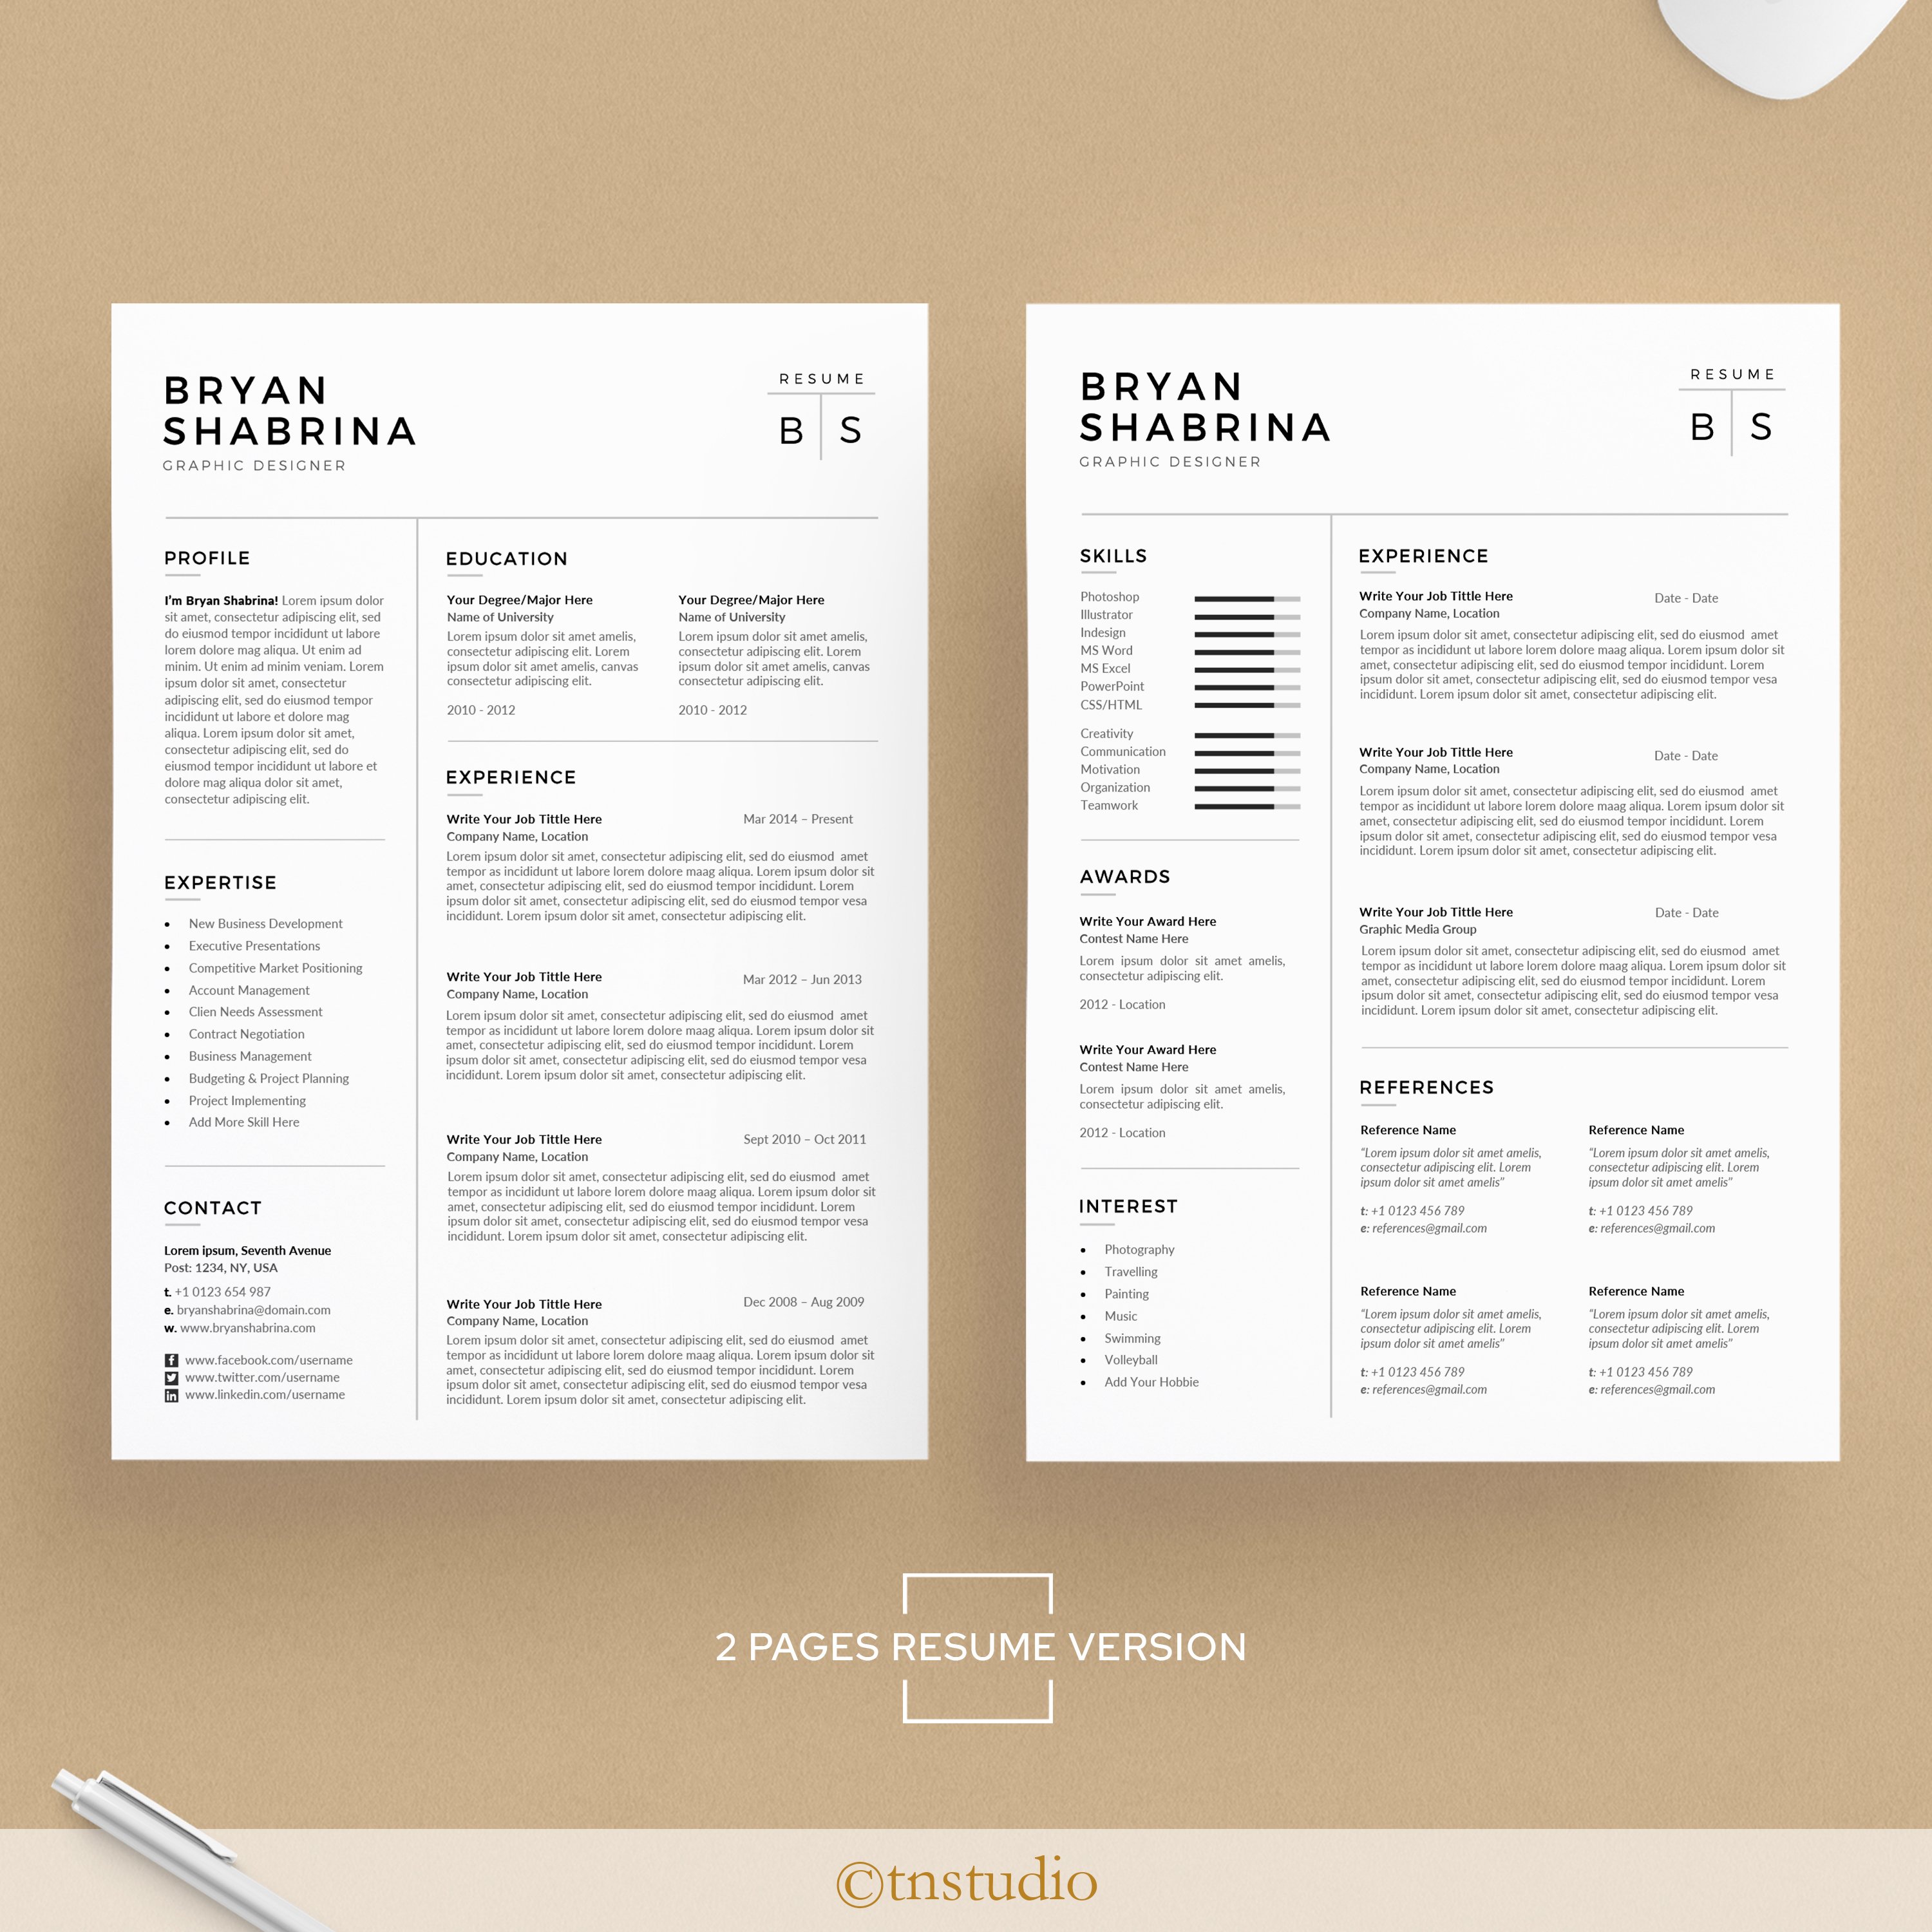 Resume/CV - BS preview image.